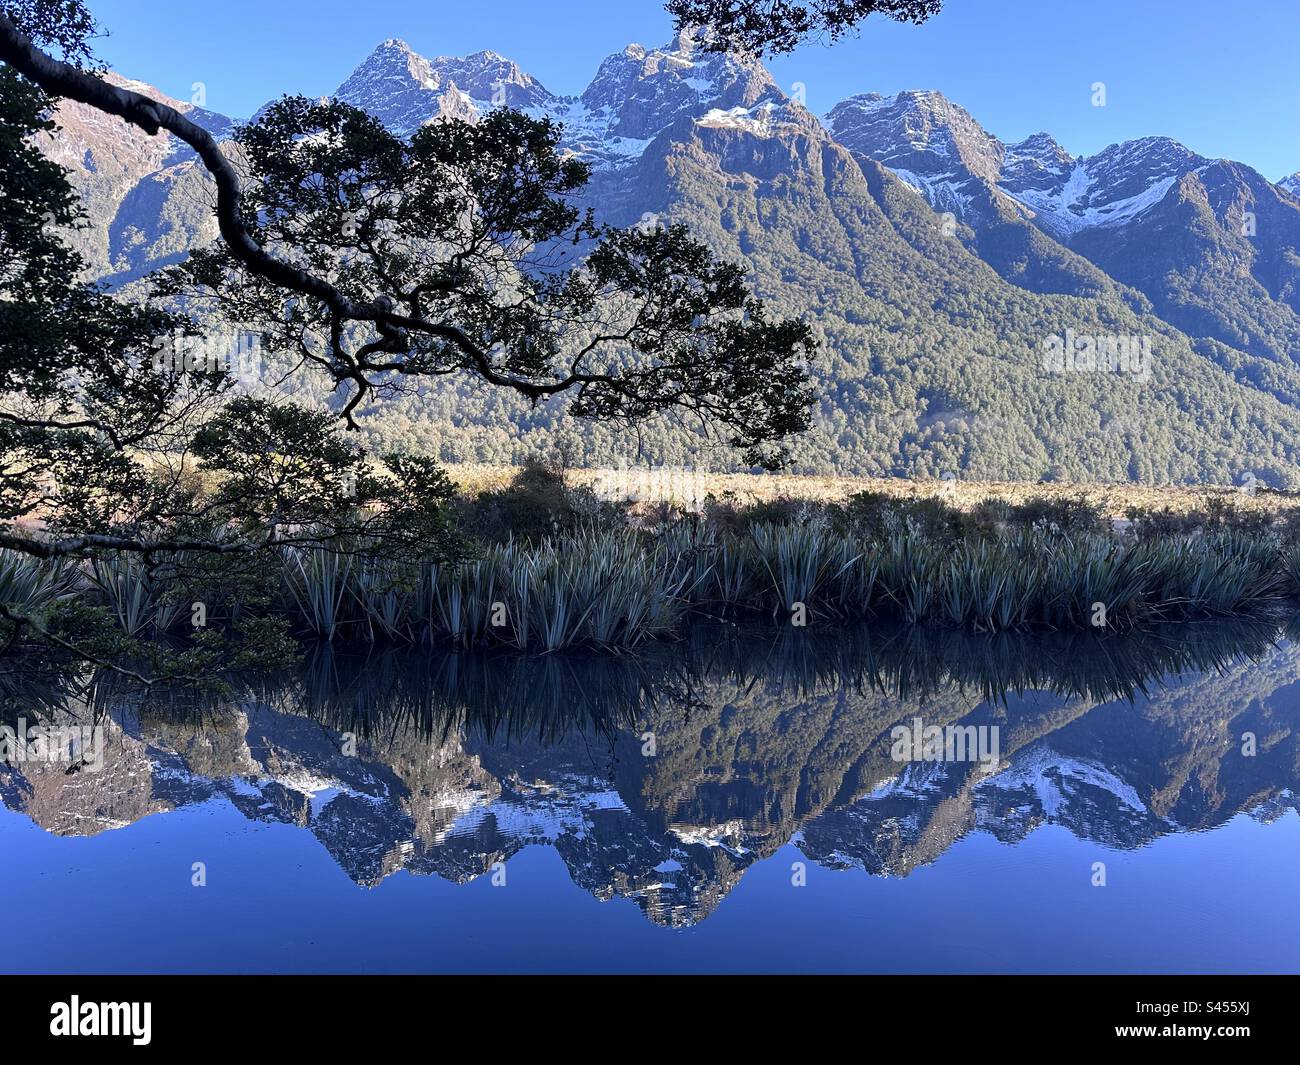 Reflection on the water at mirror lake, on the way to Milford Sound. Stock Photo